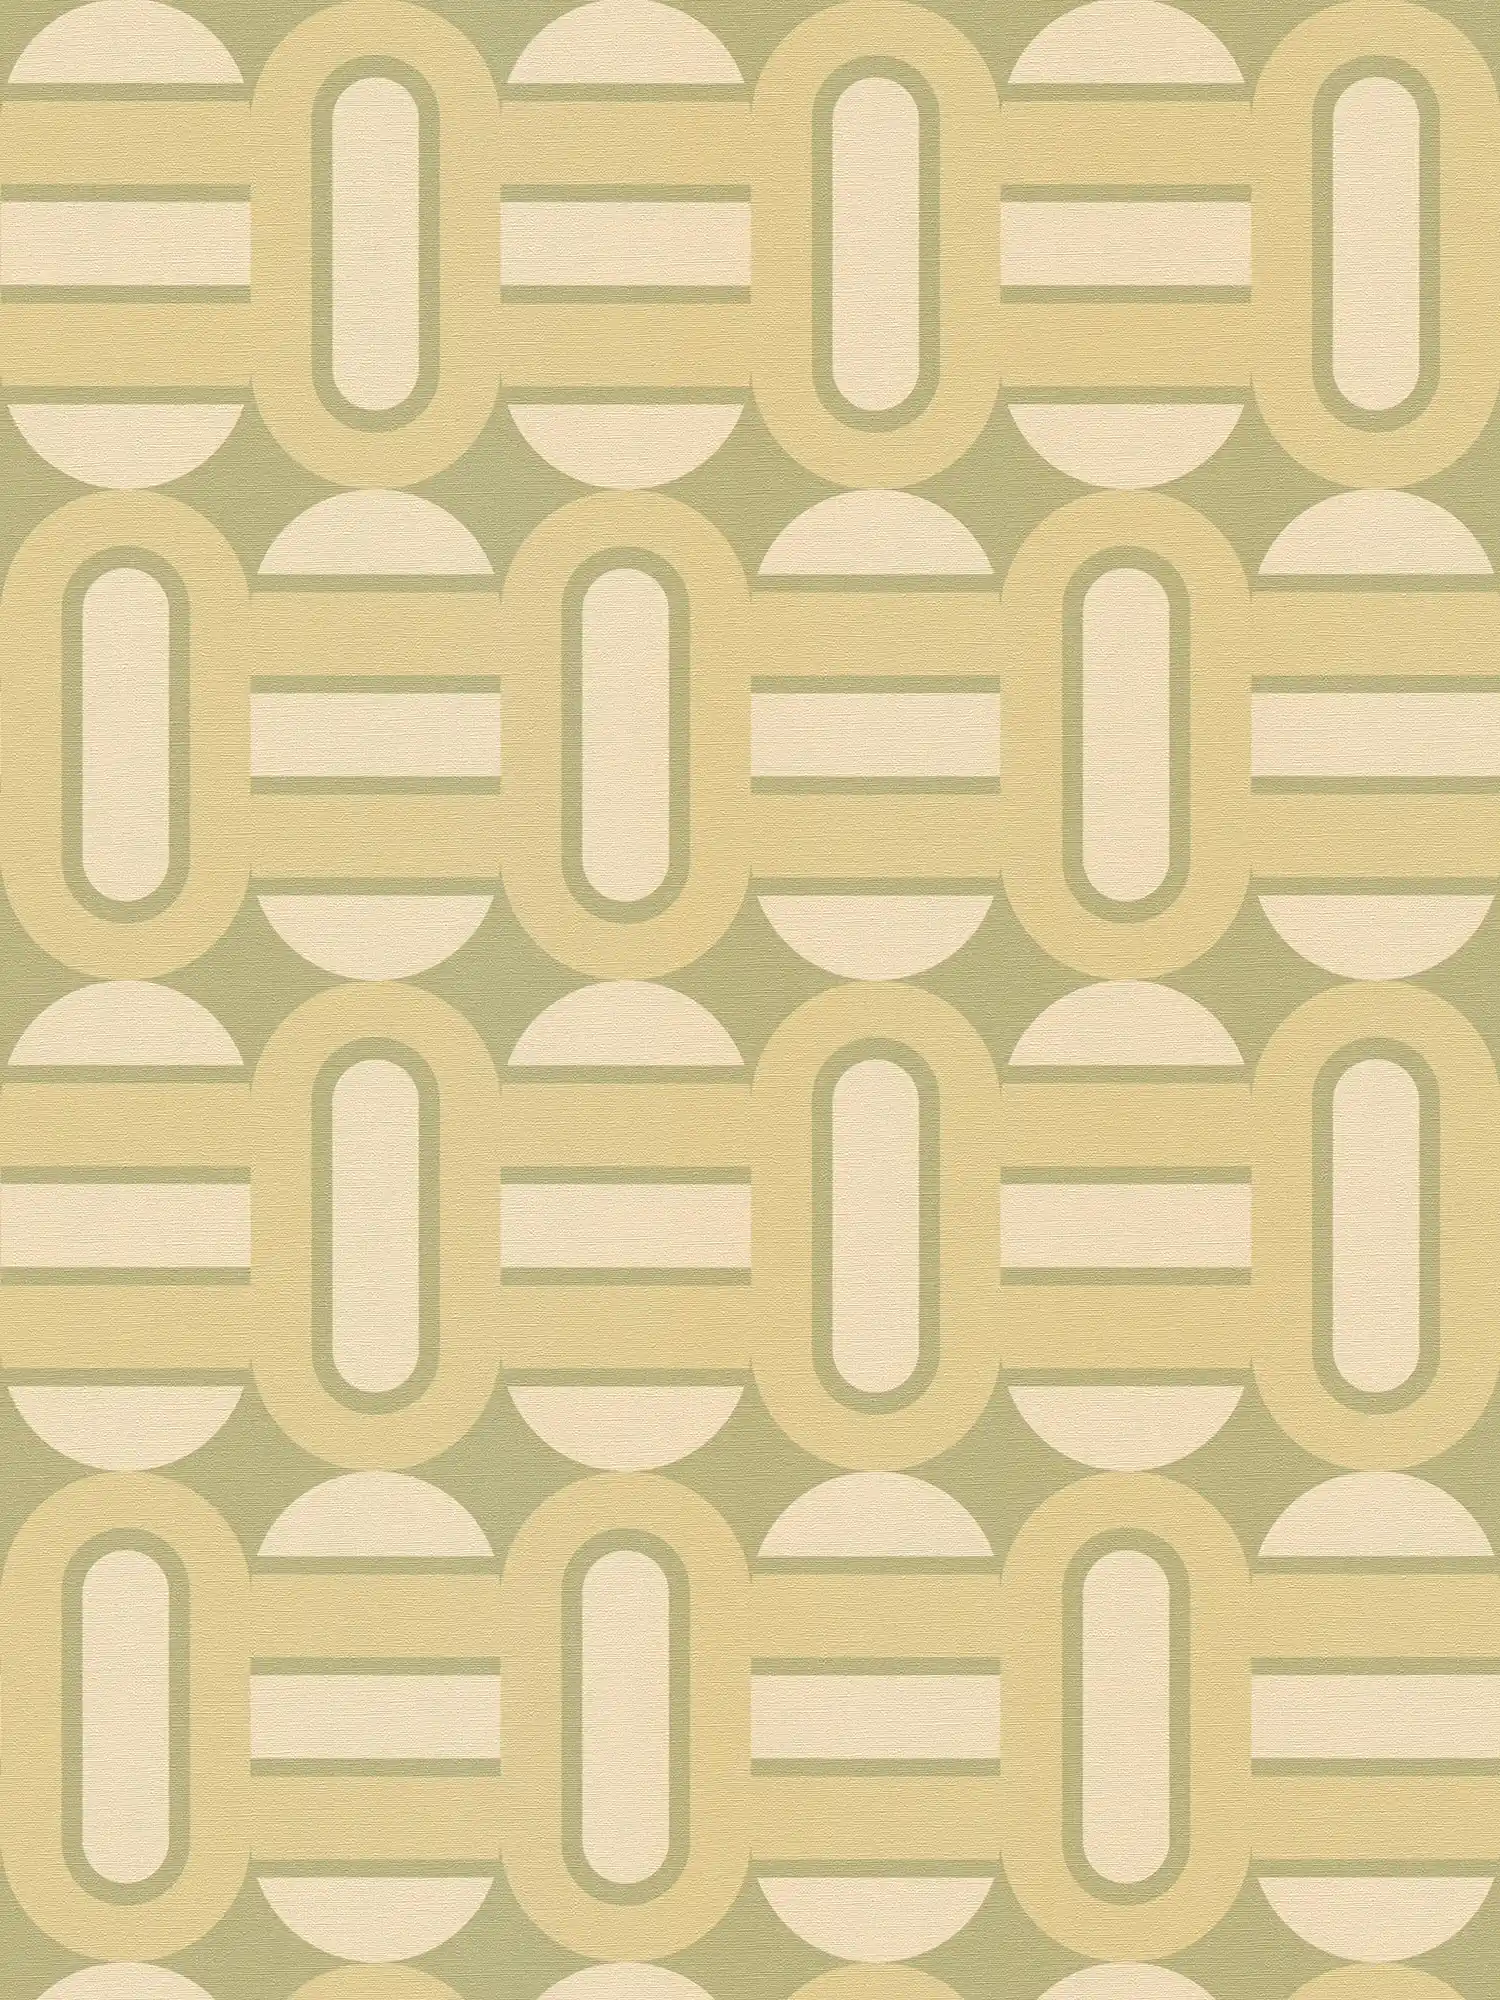 Non-woven wallpaper in retro style patterned with ovals and bars - green, cream
